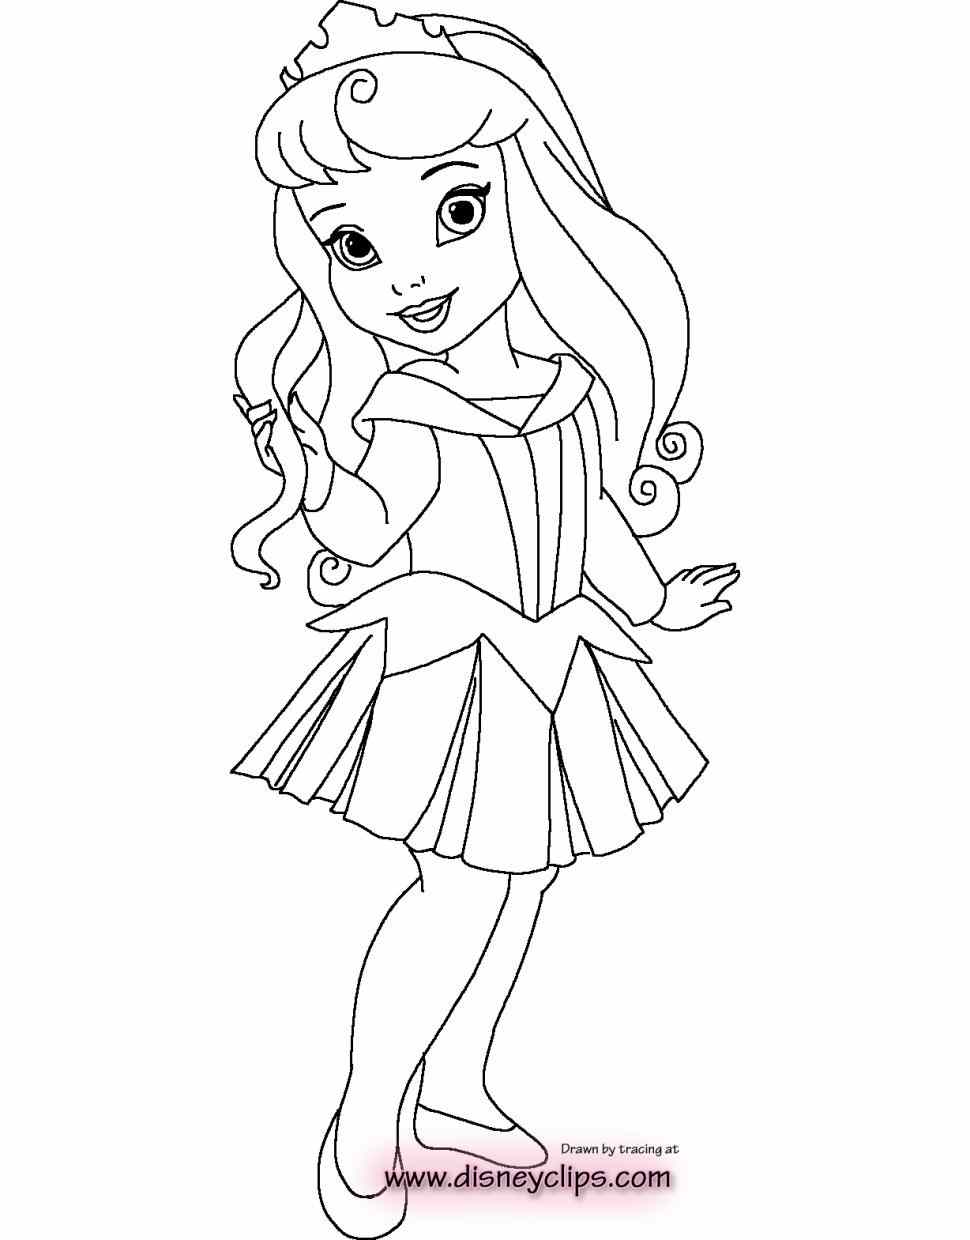 Baby Disney Princess Coloring Pages at GetColorings.com | Free ...